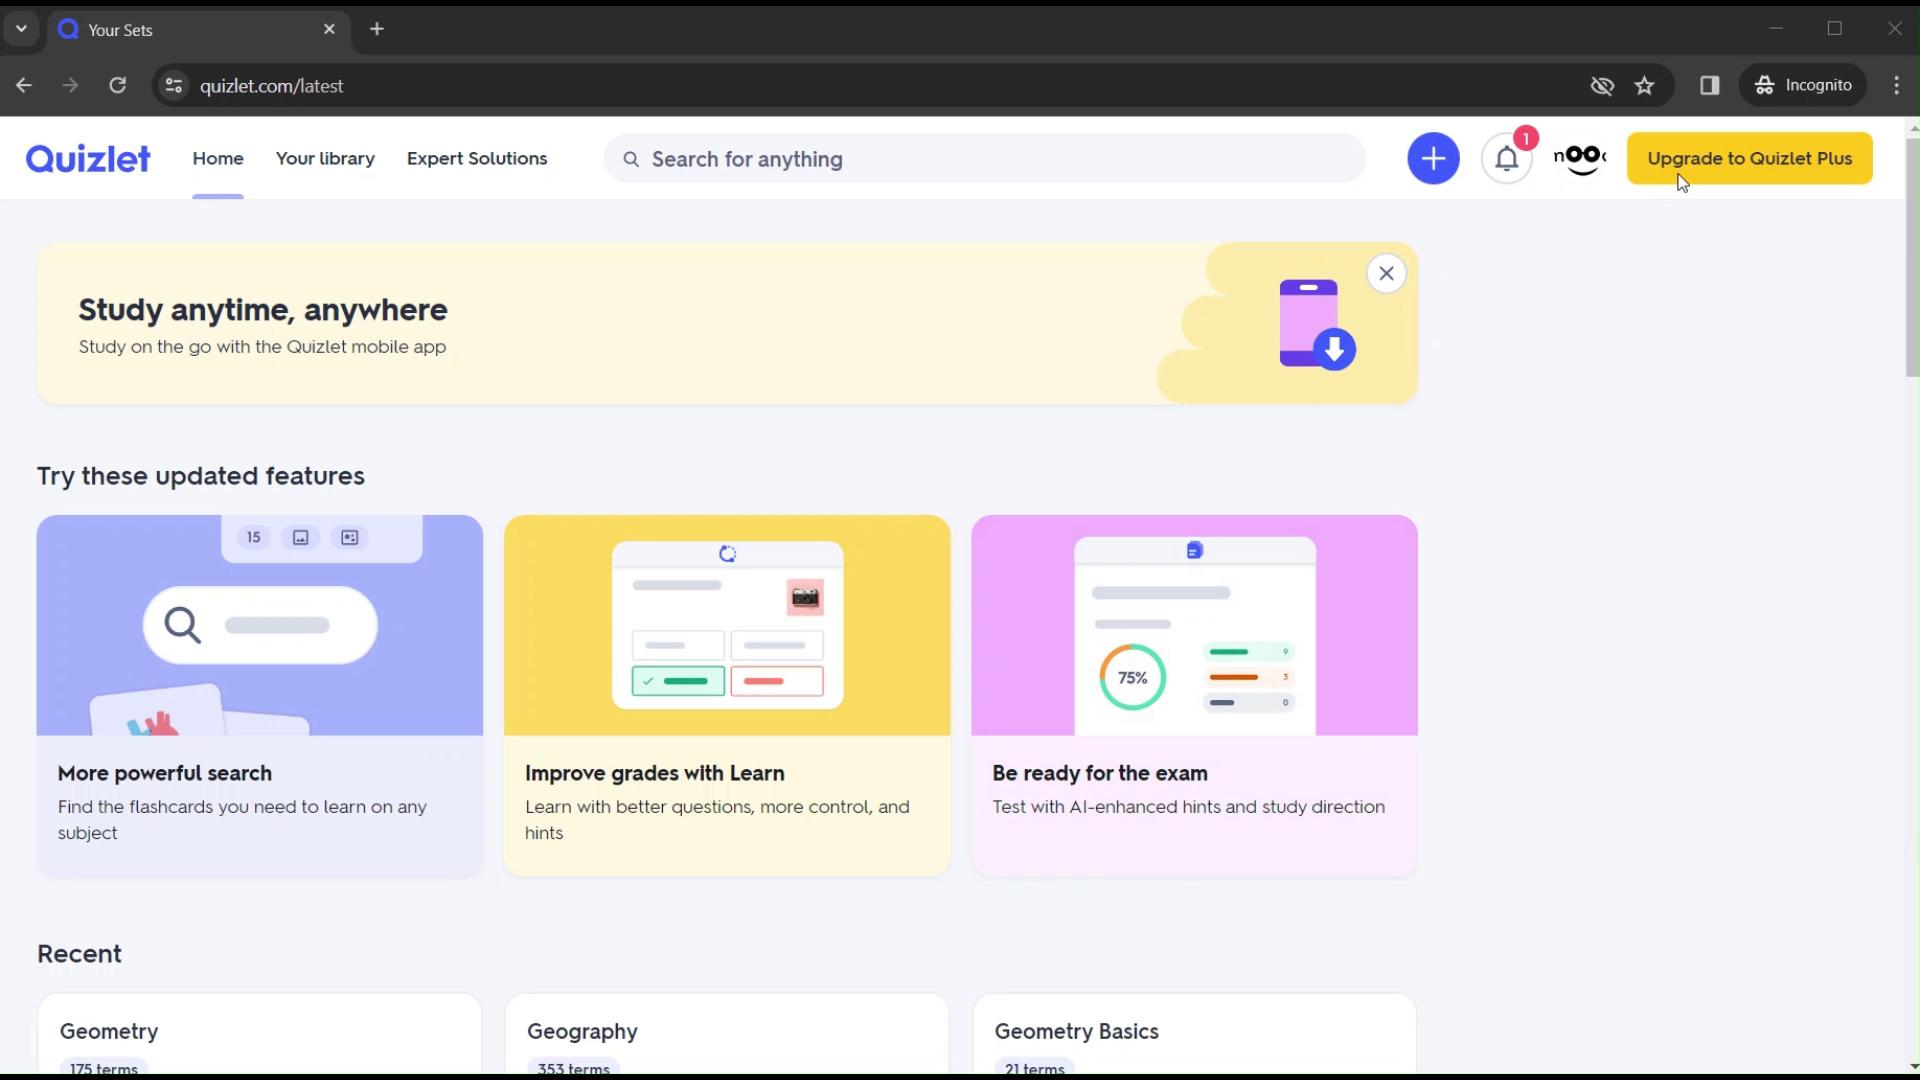 Screenshot of Upgrading your account on Quizlet